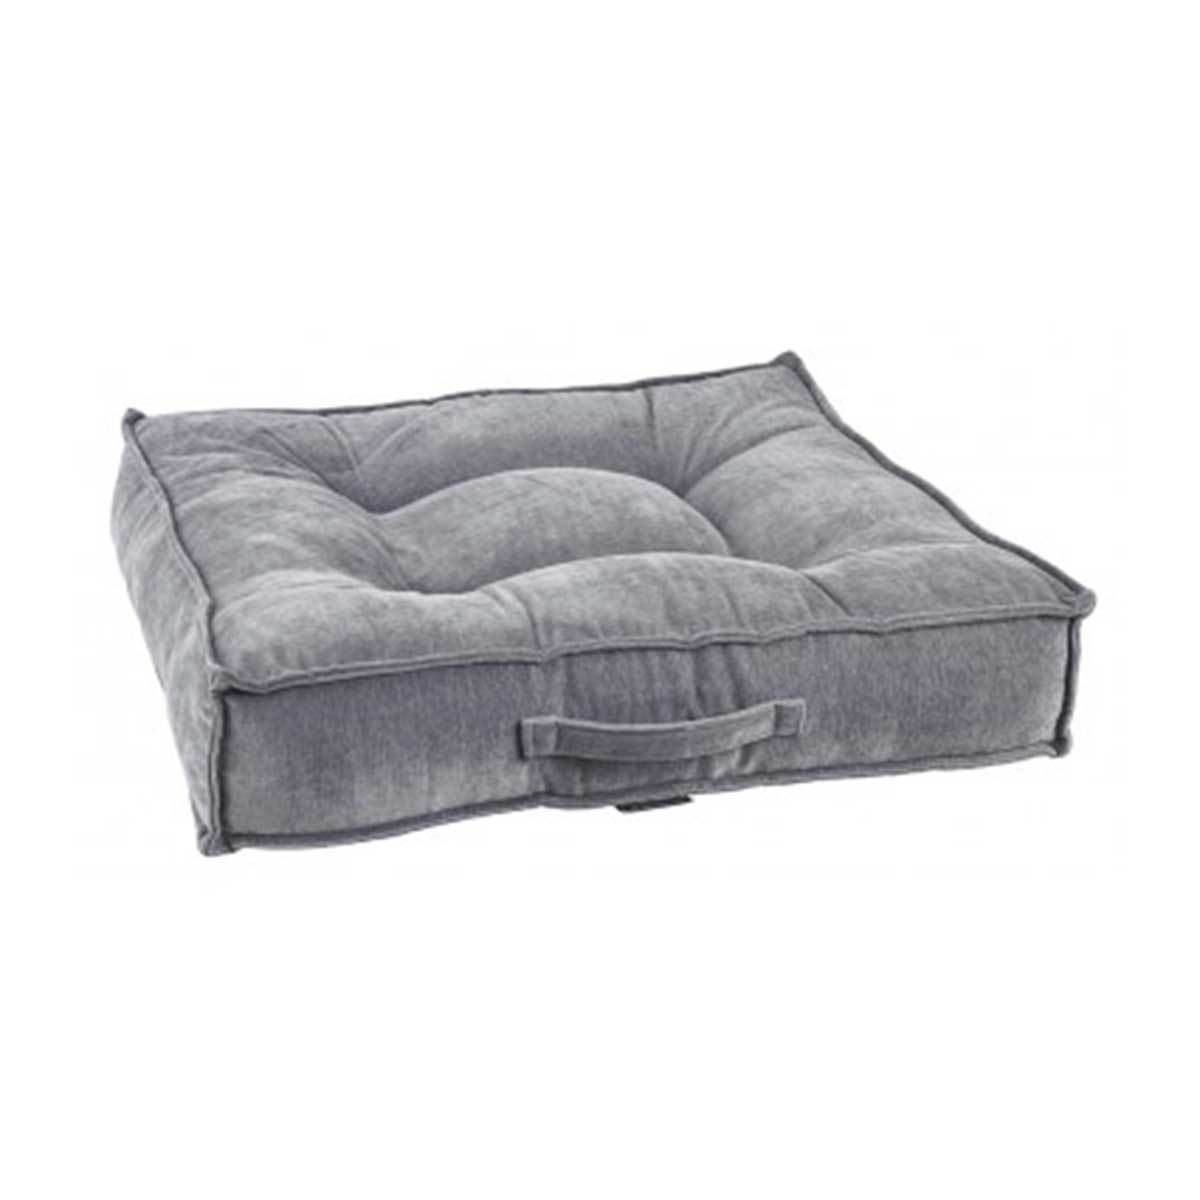 Piazza Square Dog Bed in Pumice | Pawlicious & Company